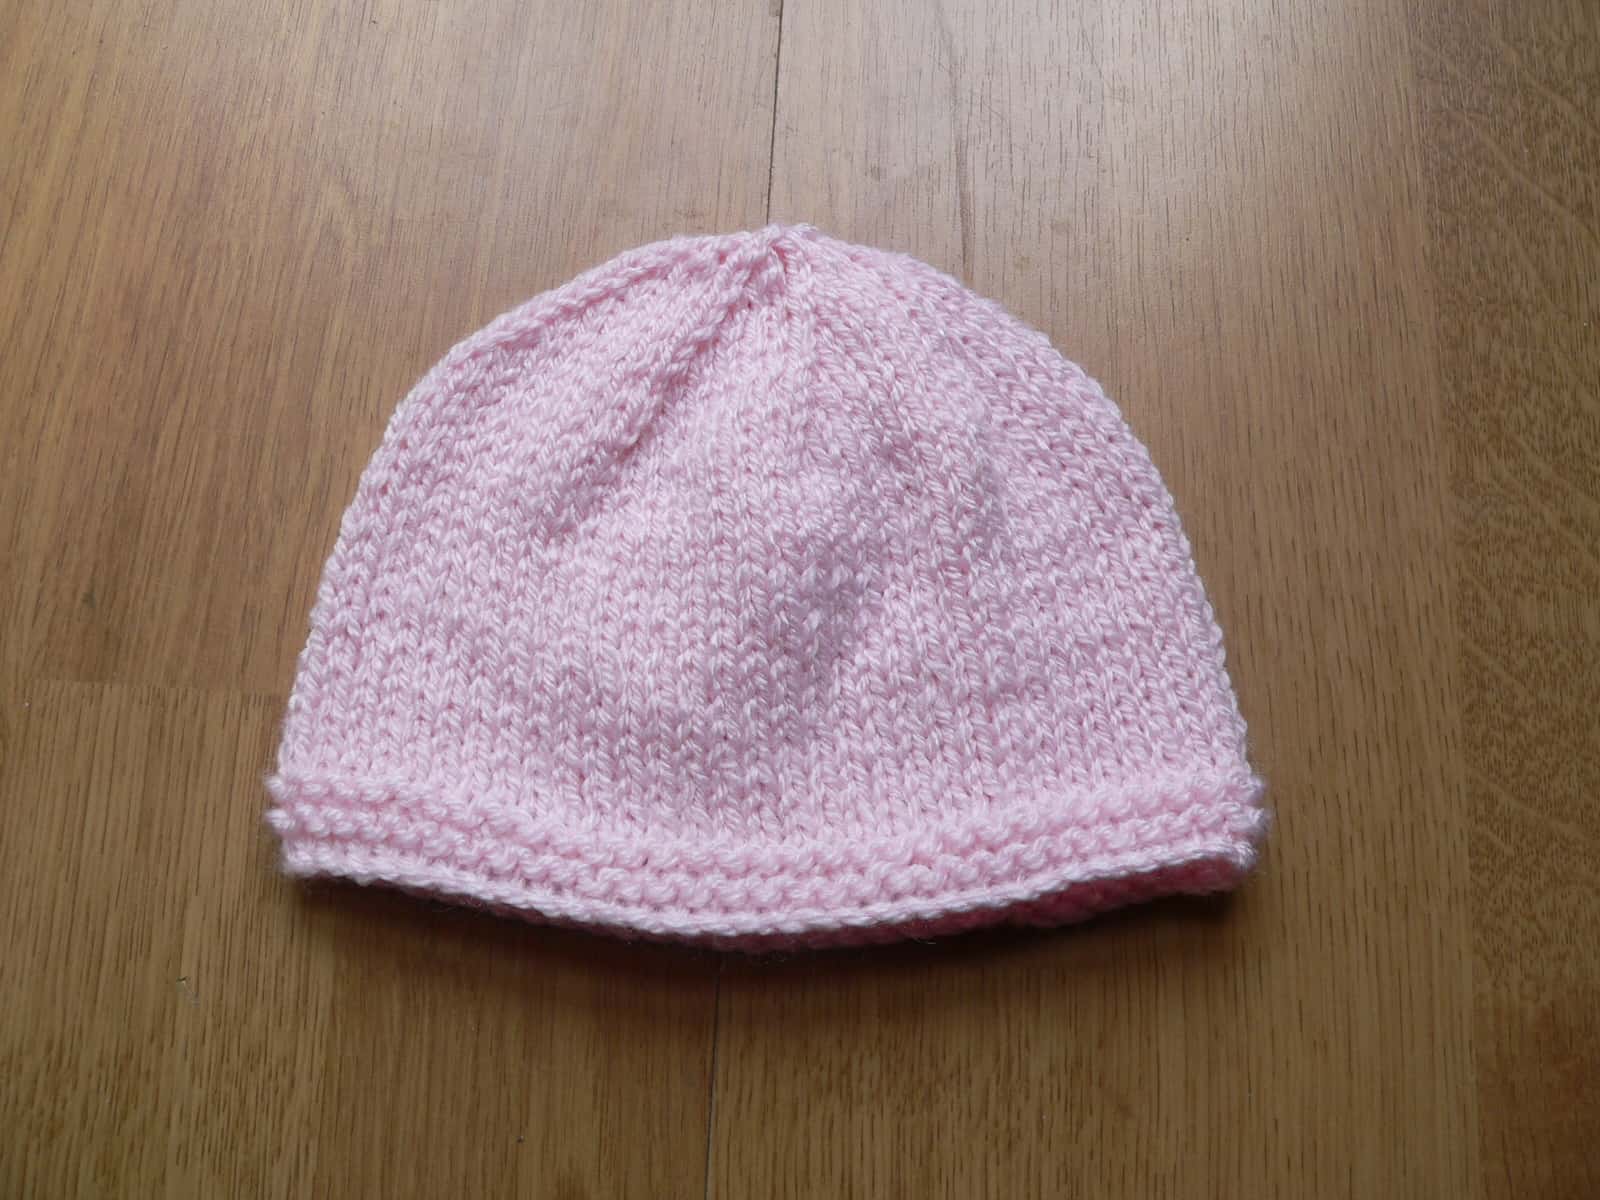 Simply Adorable 15 SuperCute Knitted Newborn Hats